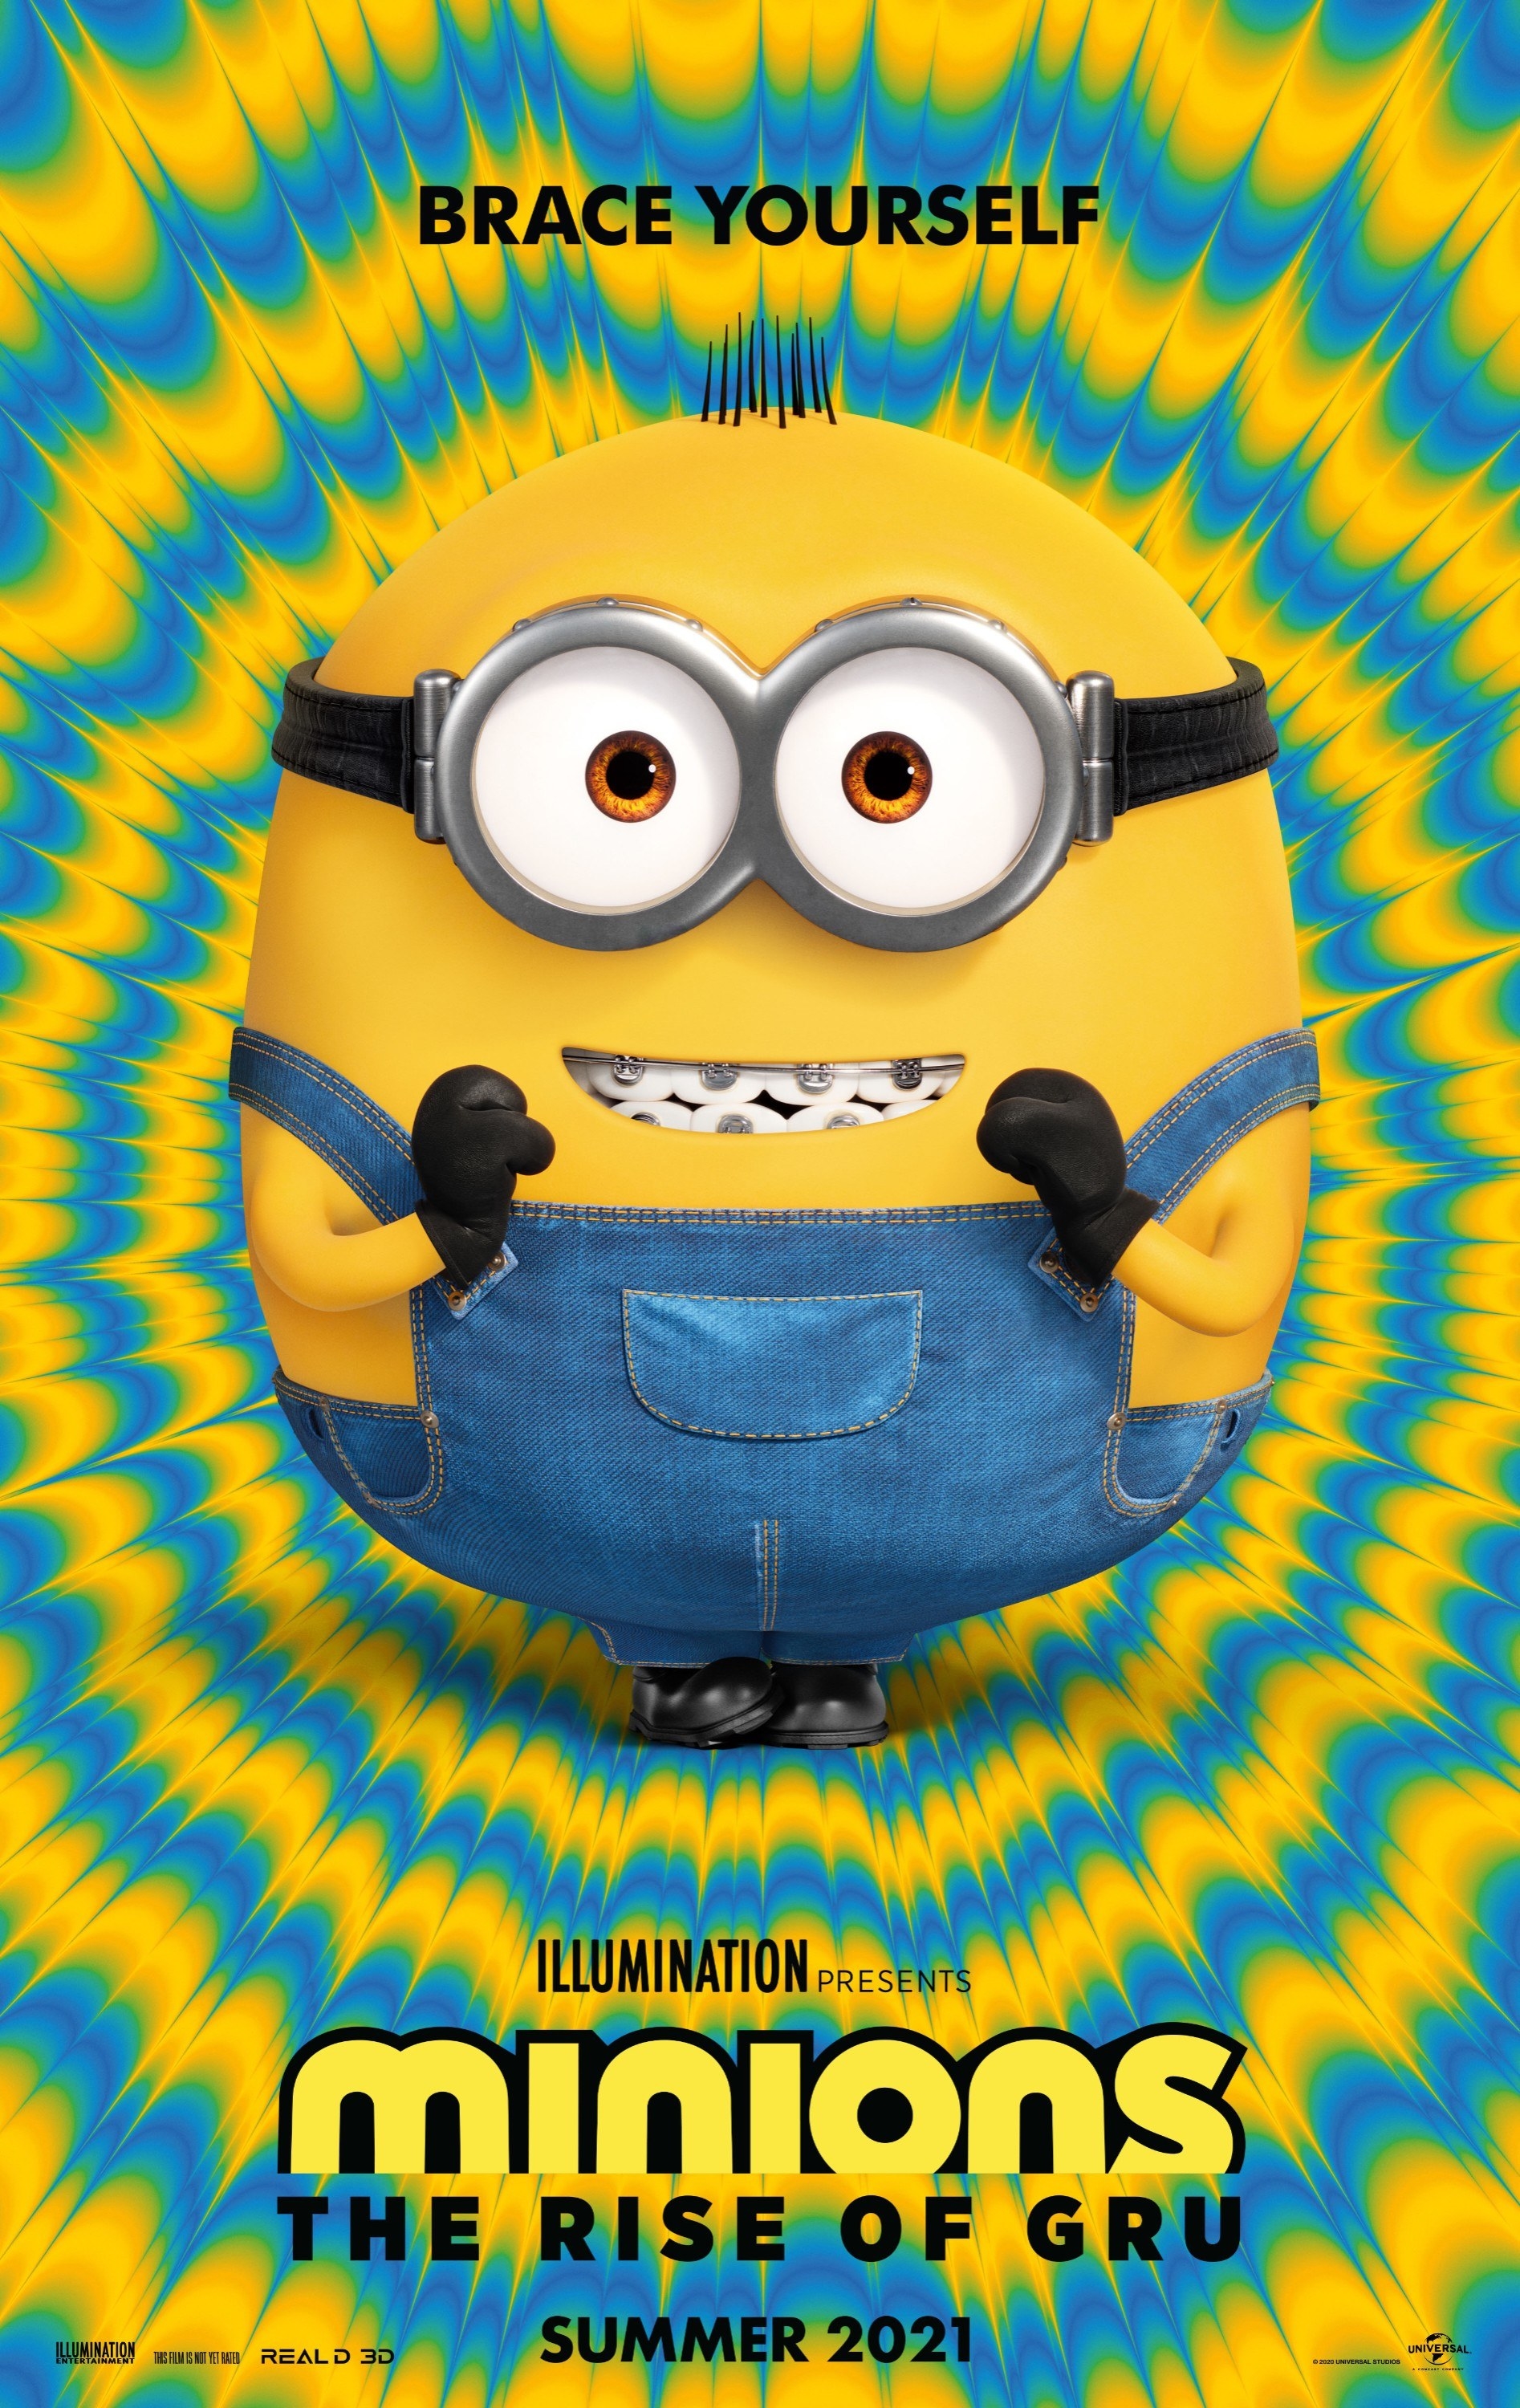 The poster for &quot;Minions: The Rise of Gru&quot; shows one of the Minions with braces